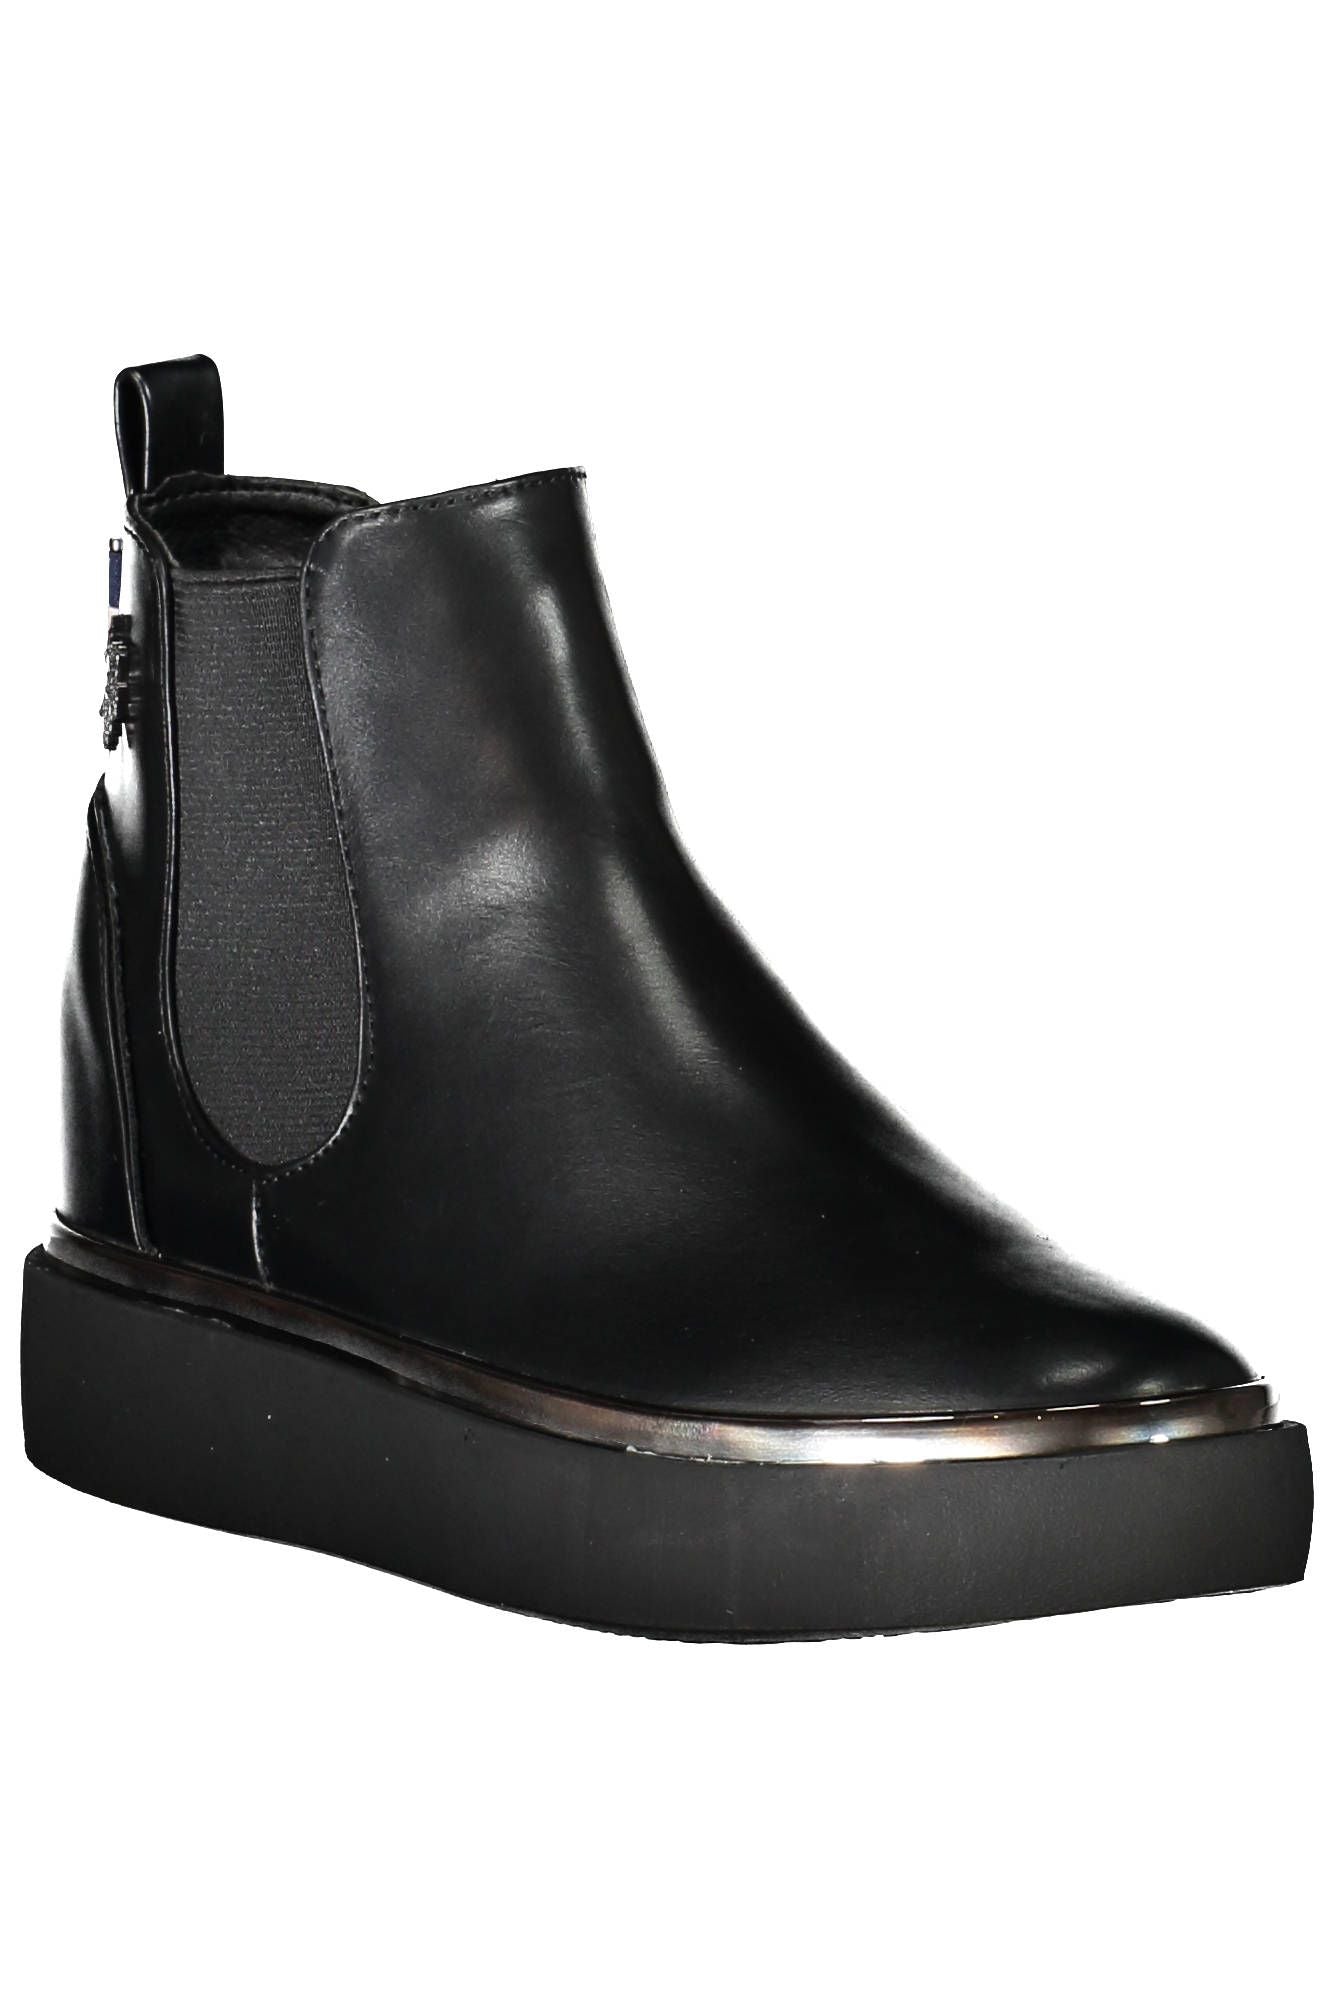 U.S. POLO ASSN. Chic Low Ankle Boot with Contrasting Details